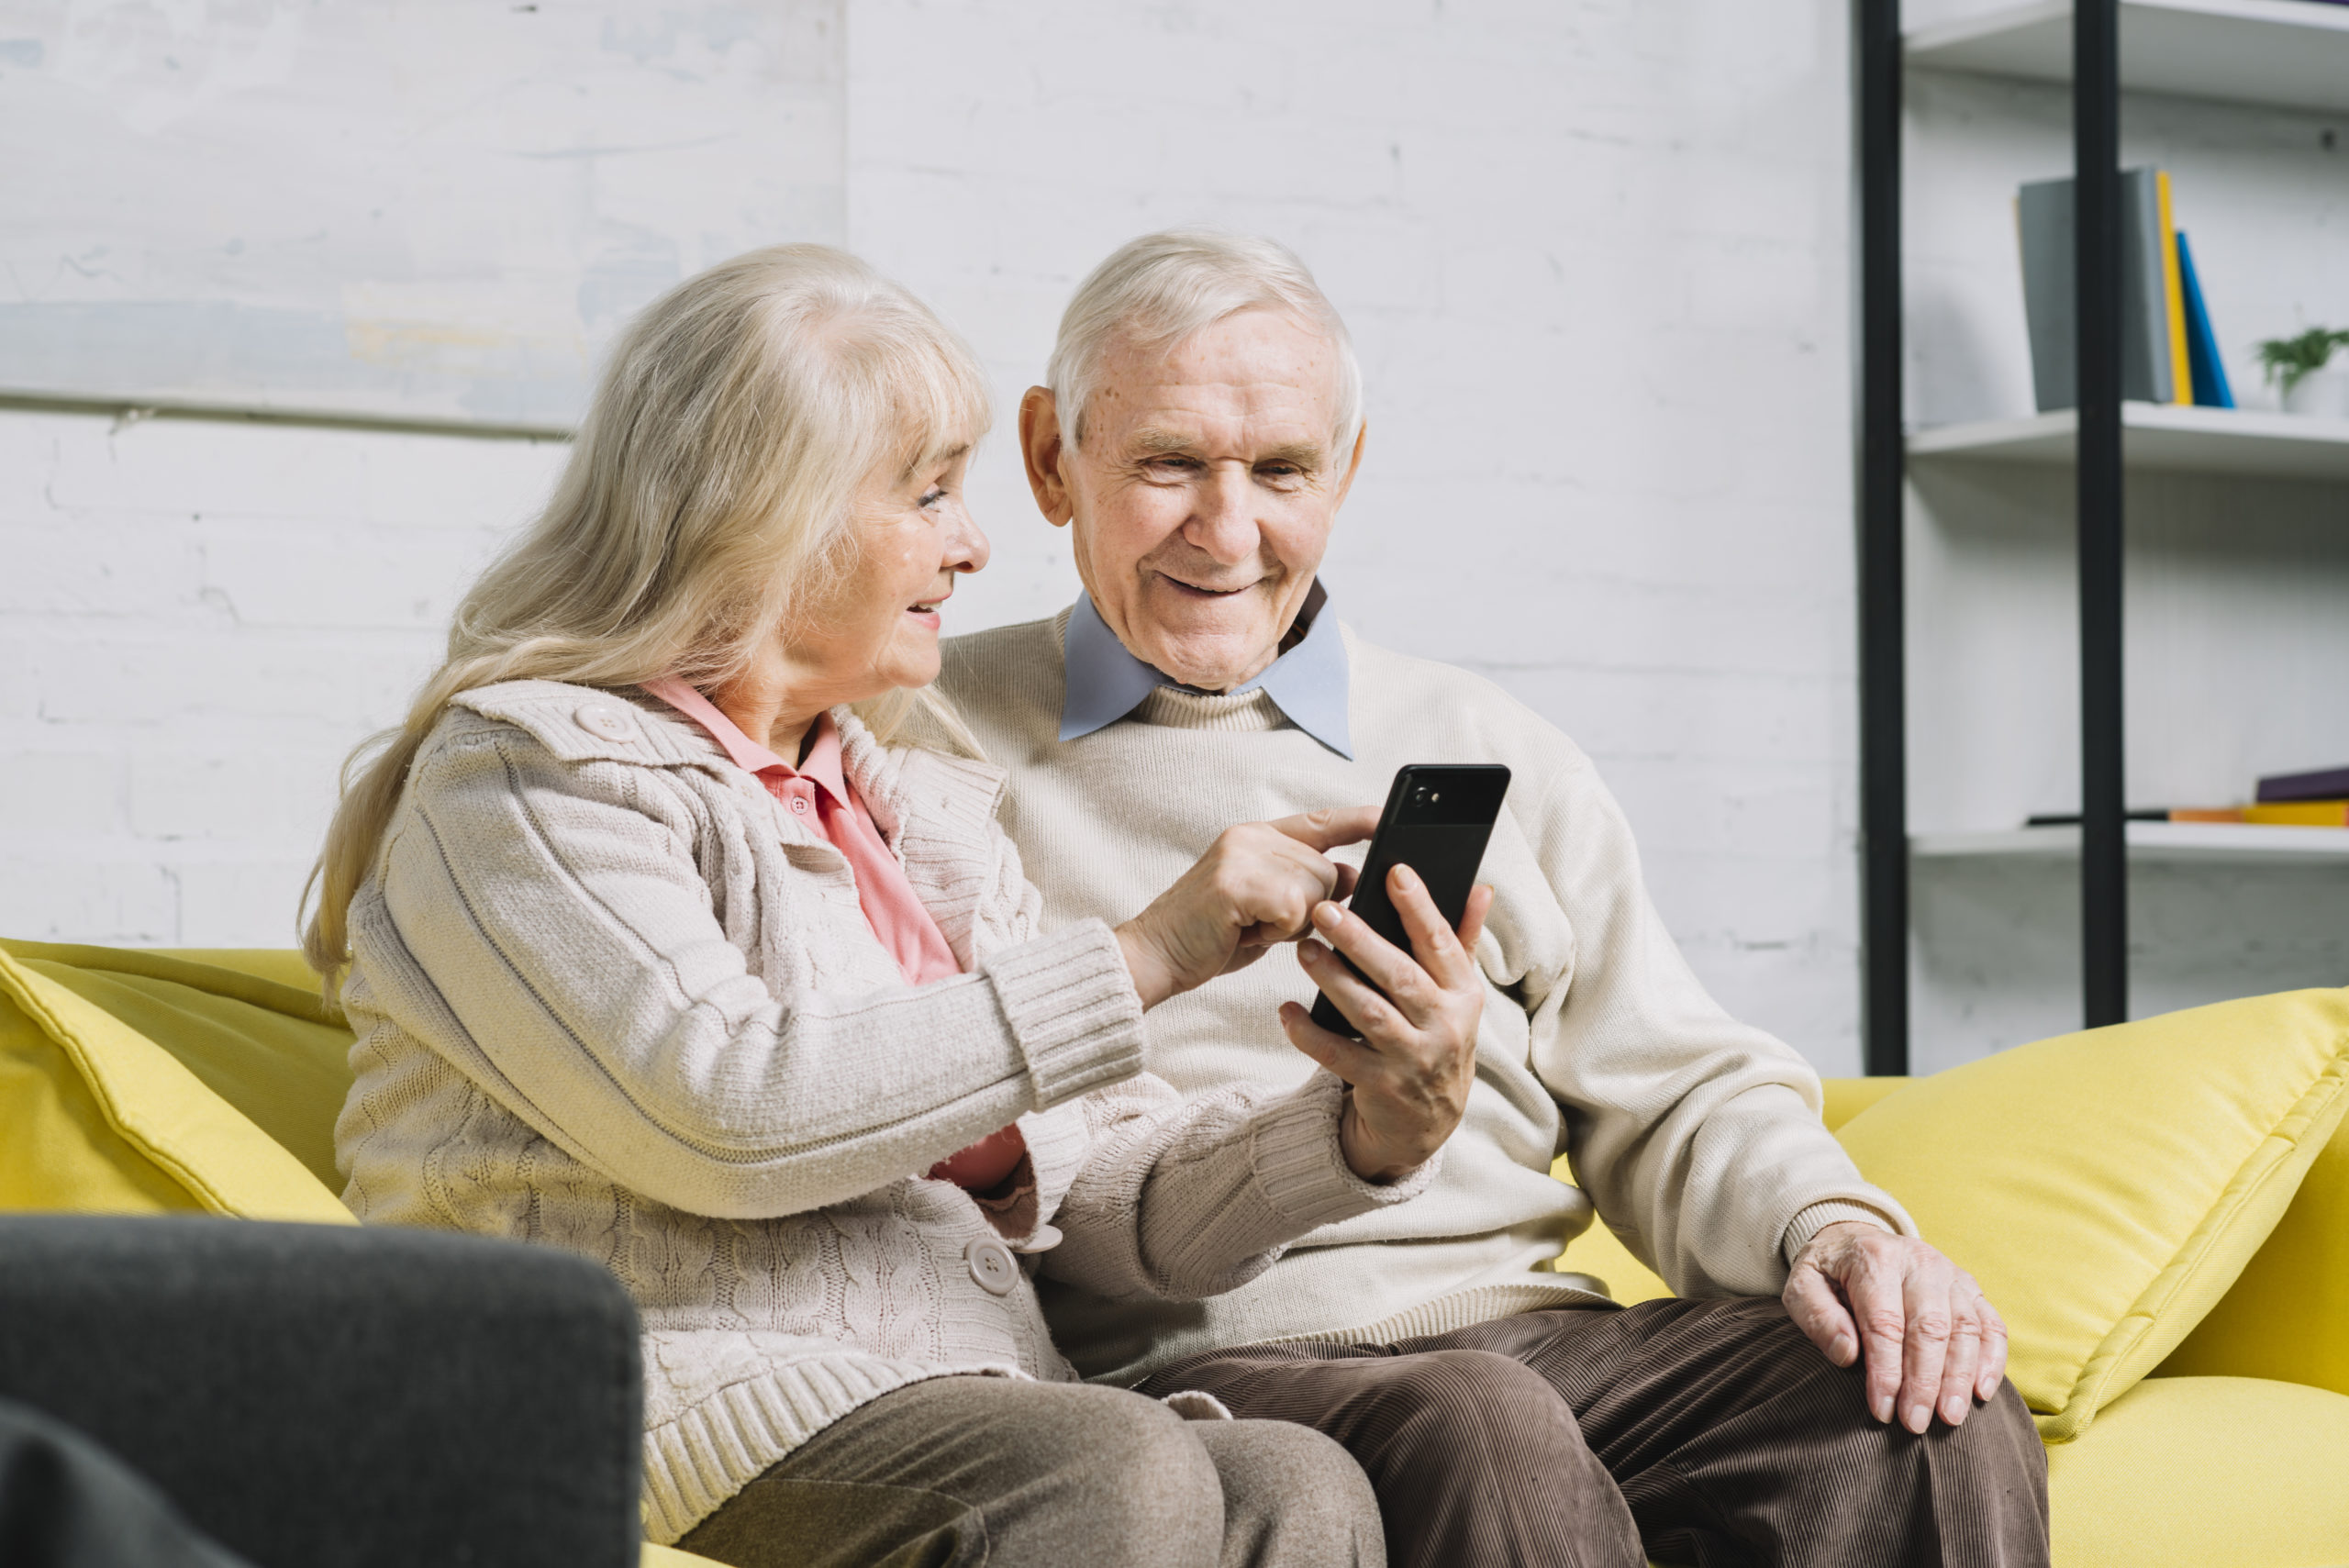 benefits to using assistive technology for people living with dementia. Issac care app